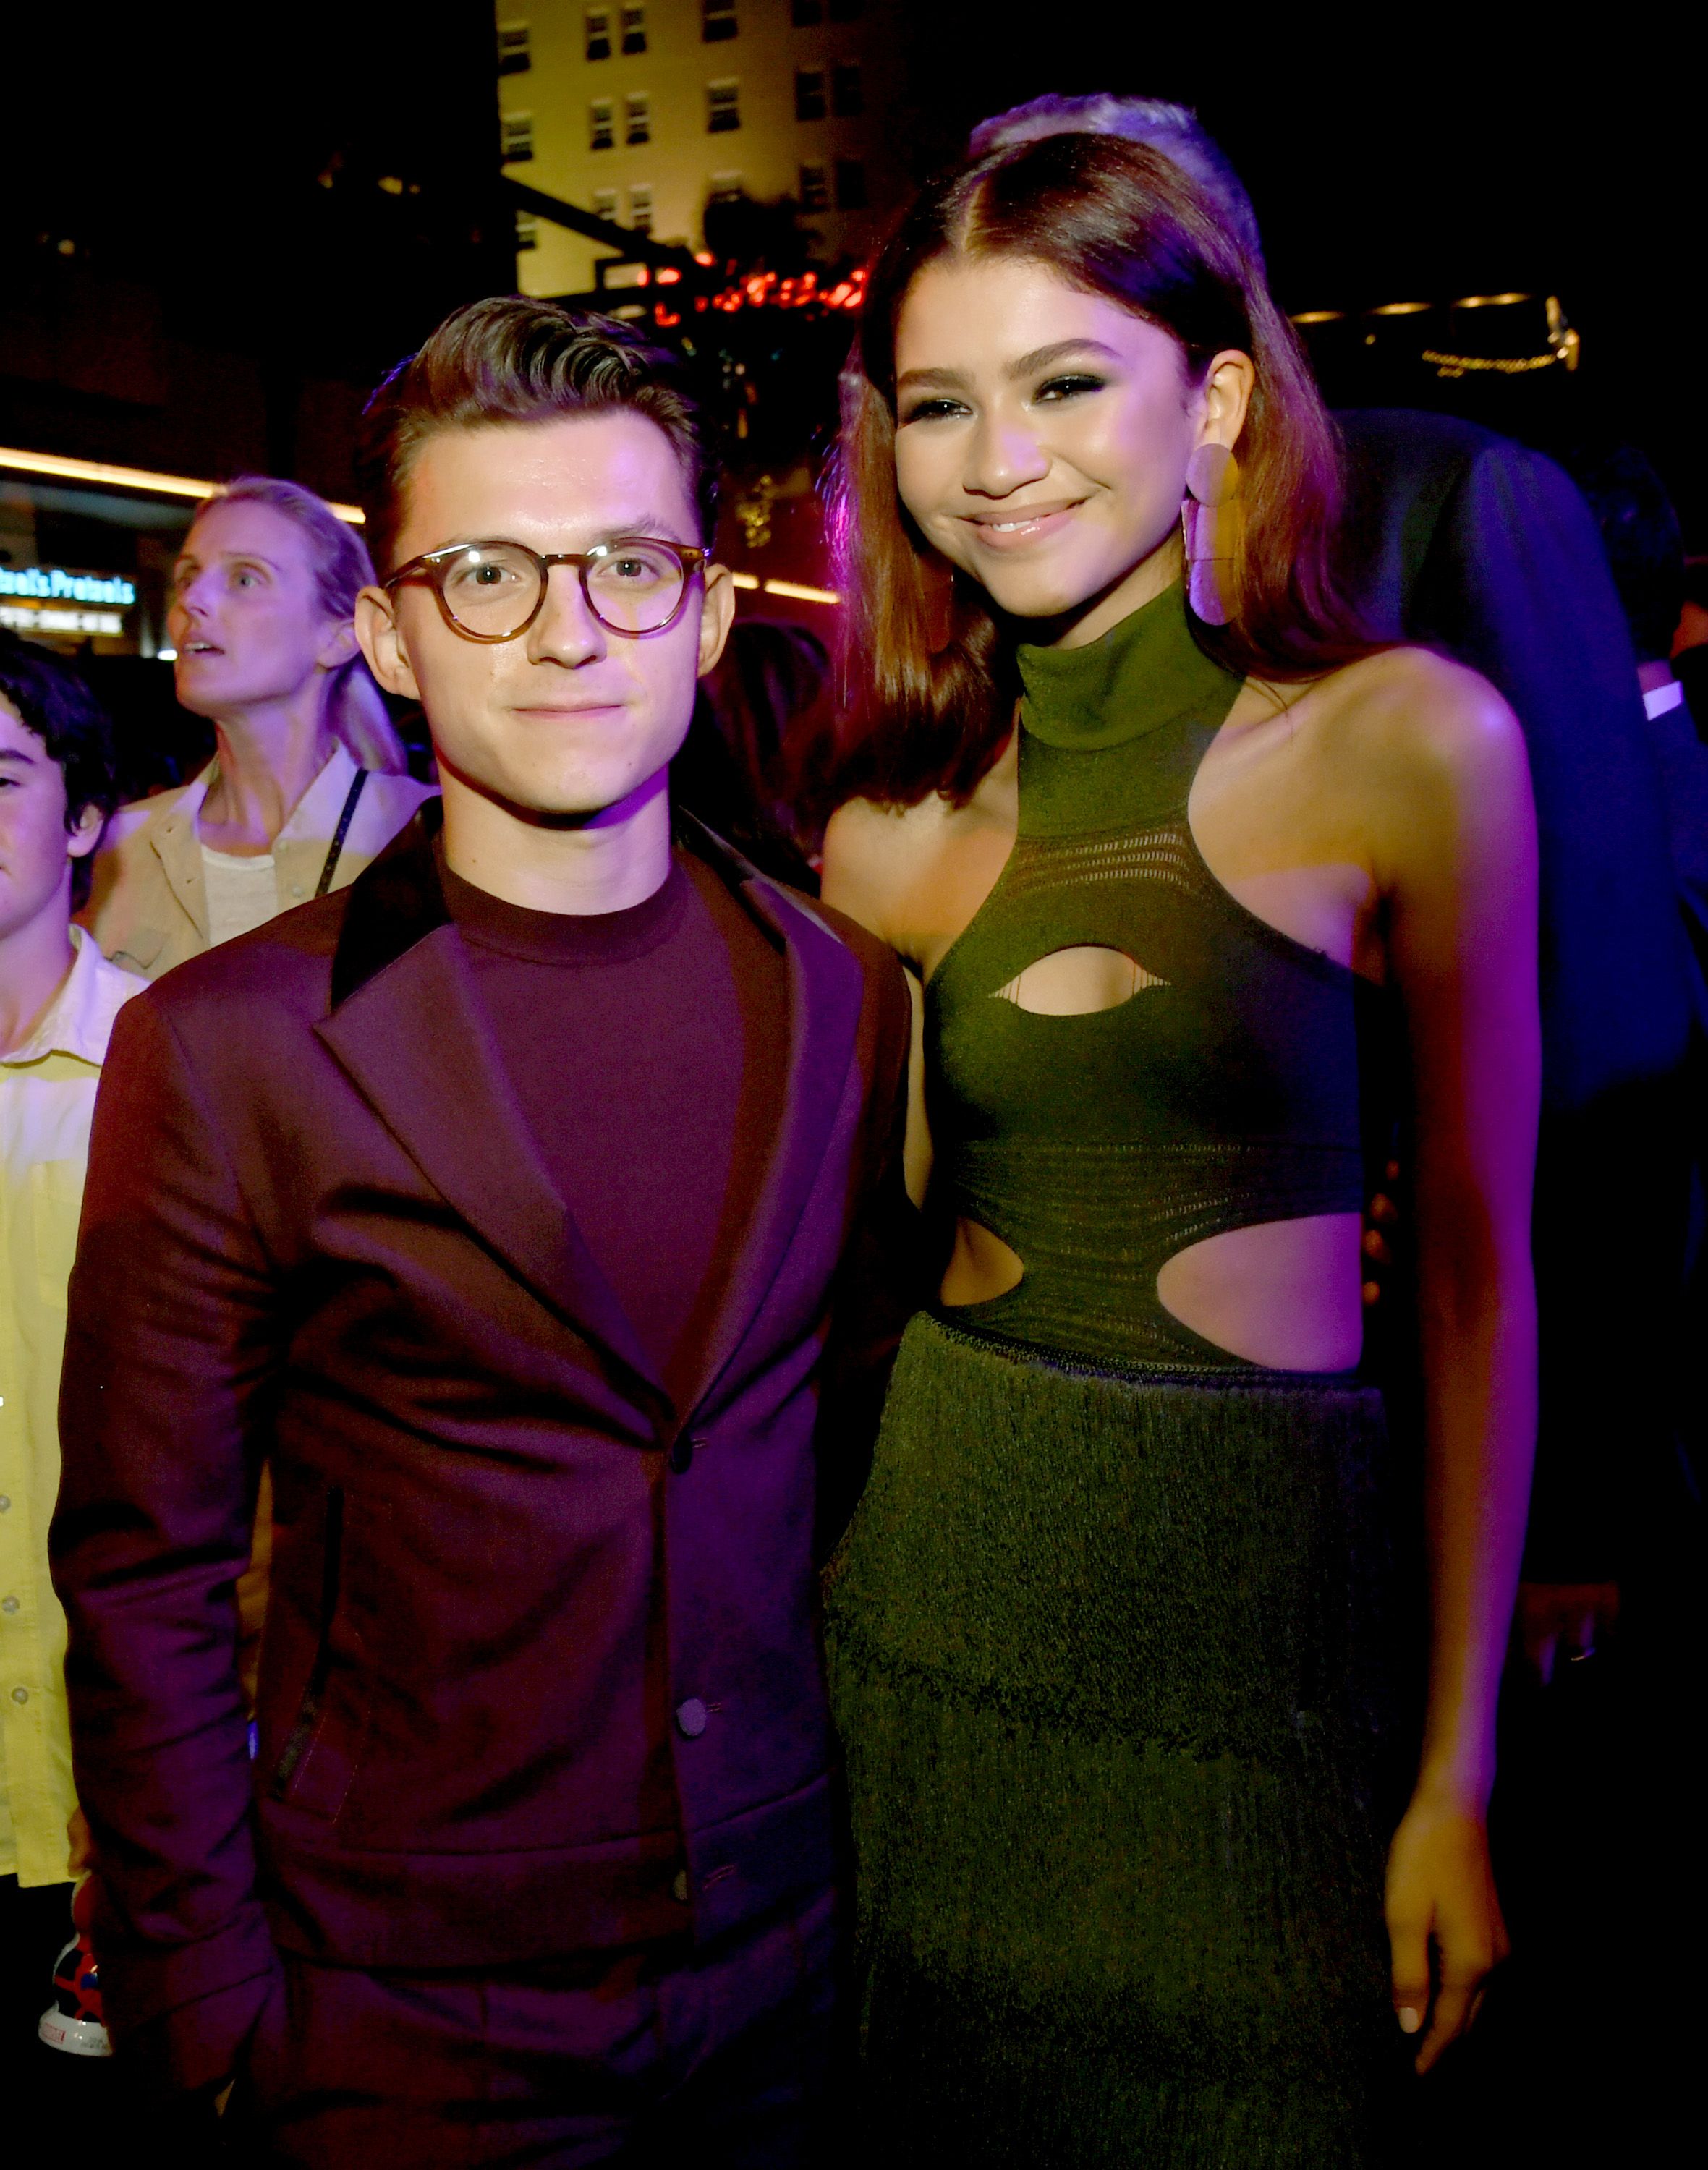 tom-holland-and-zendaya-pose-at-the-after-party-for-the-news-photo-1158552678-1567348023.jpg